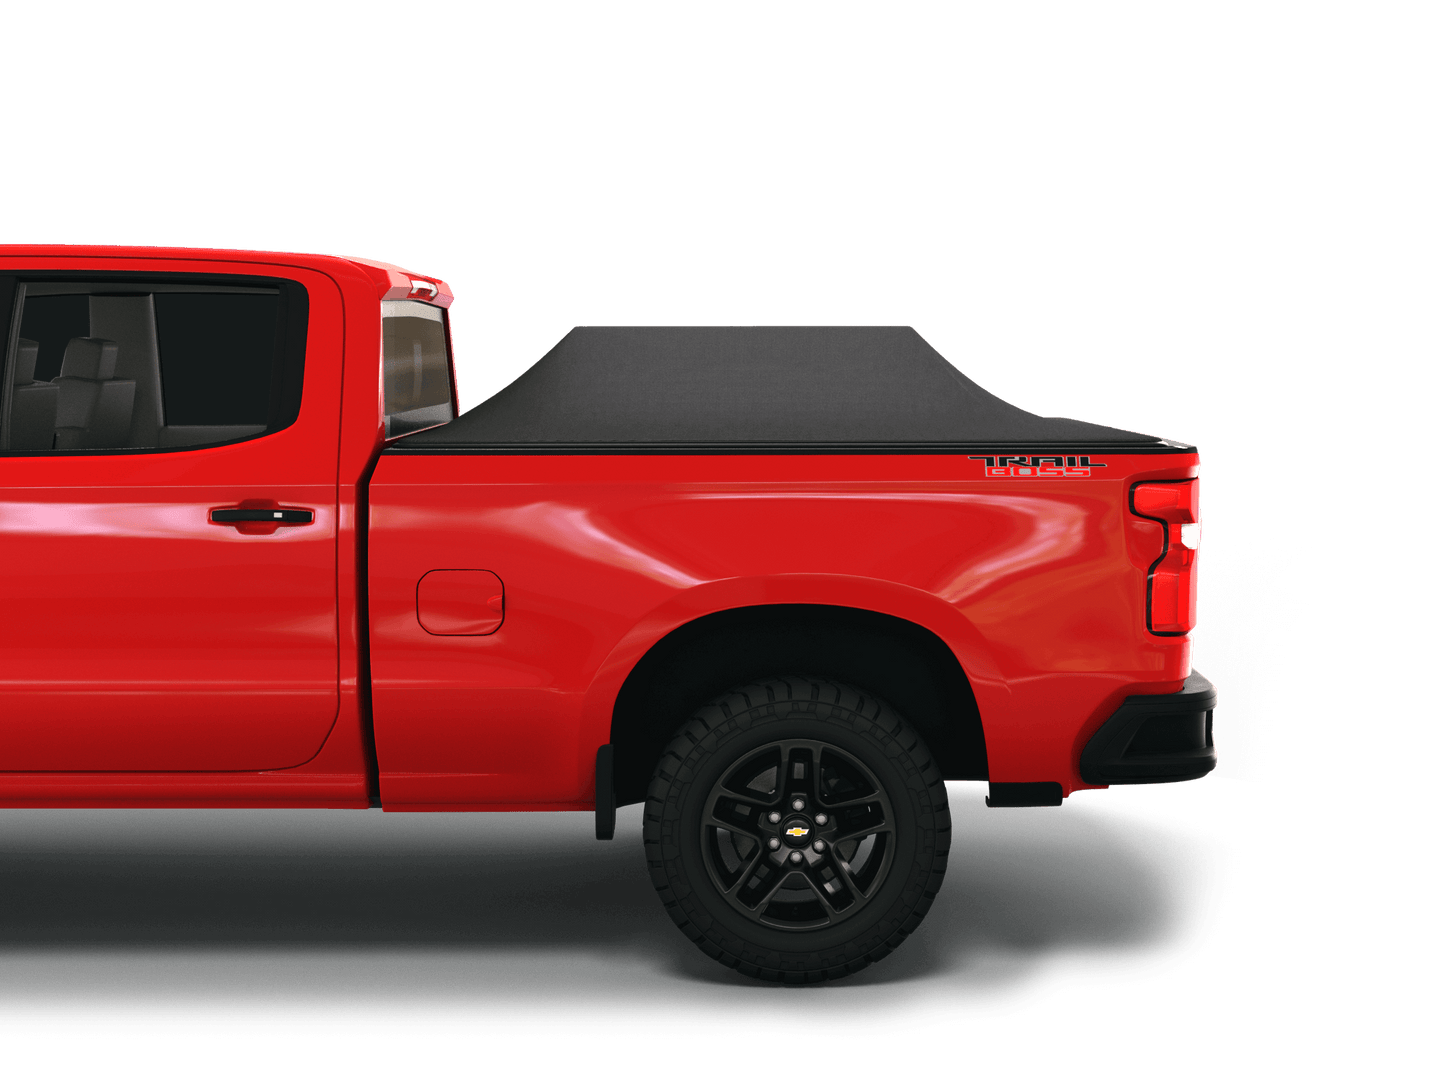 Red Chevrolet Silverado 1500 / GMC Sierra 1500 with Sawtooth Stretch tonneau cover expanded over cargo load